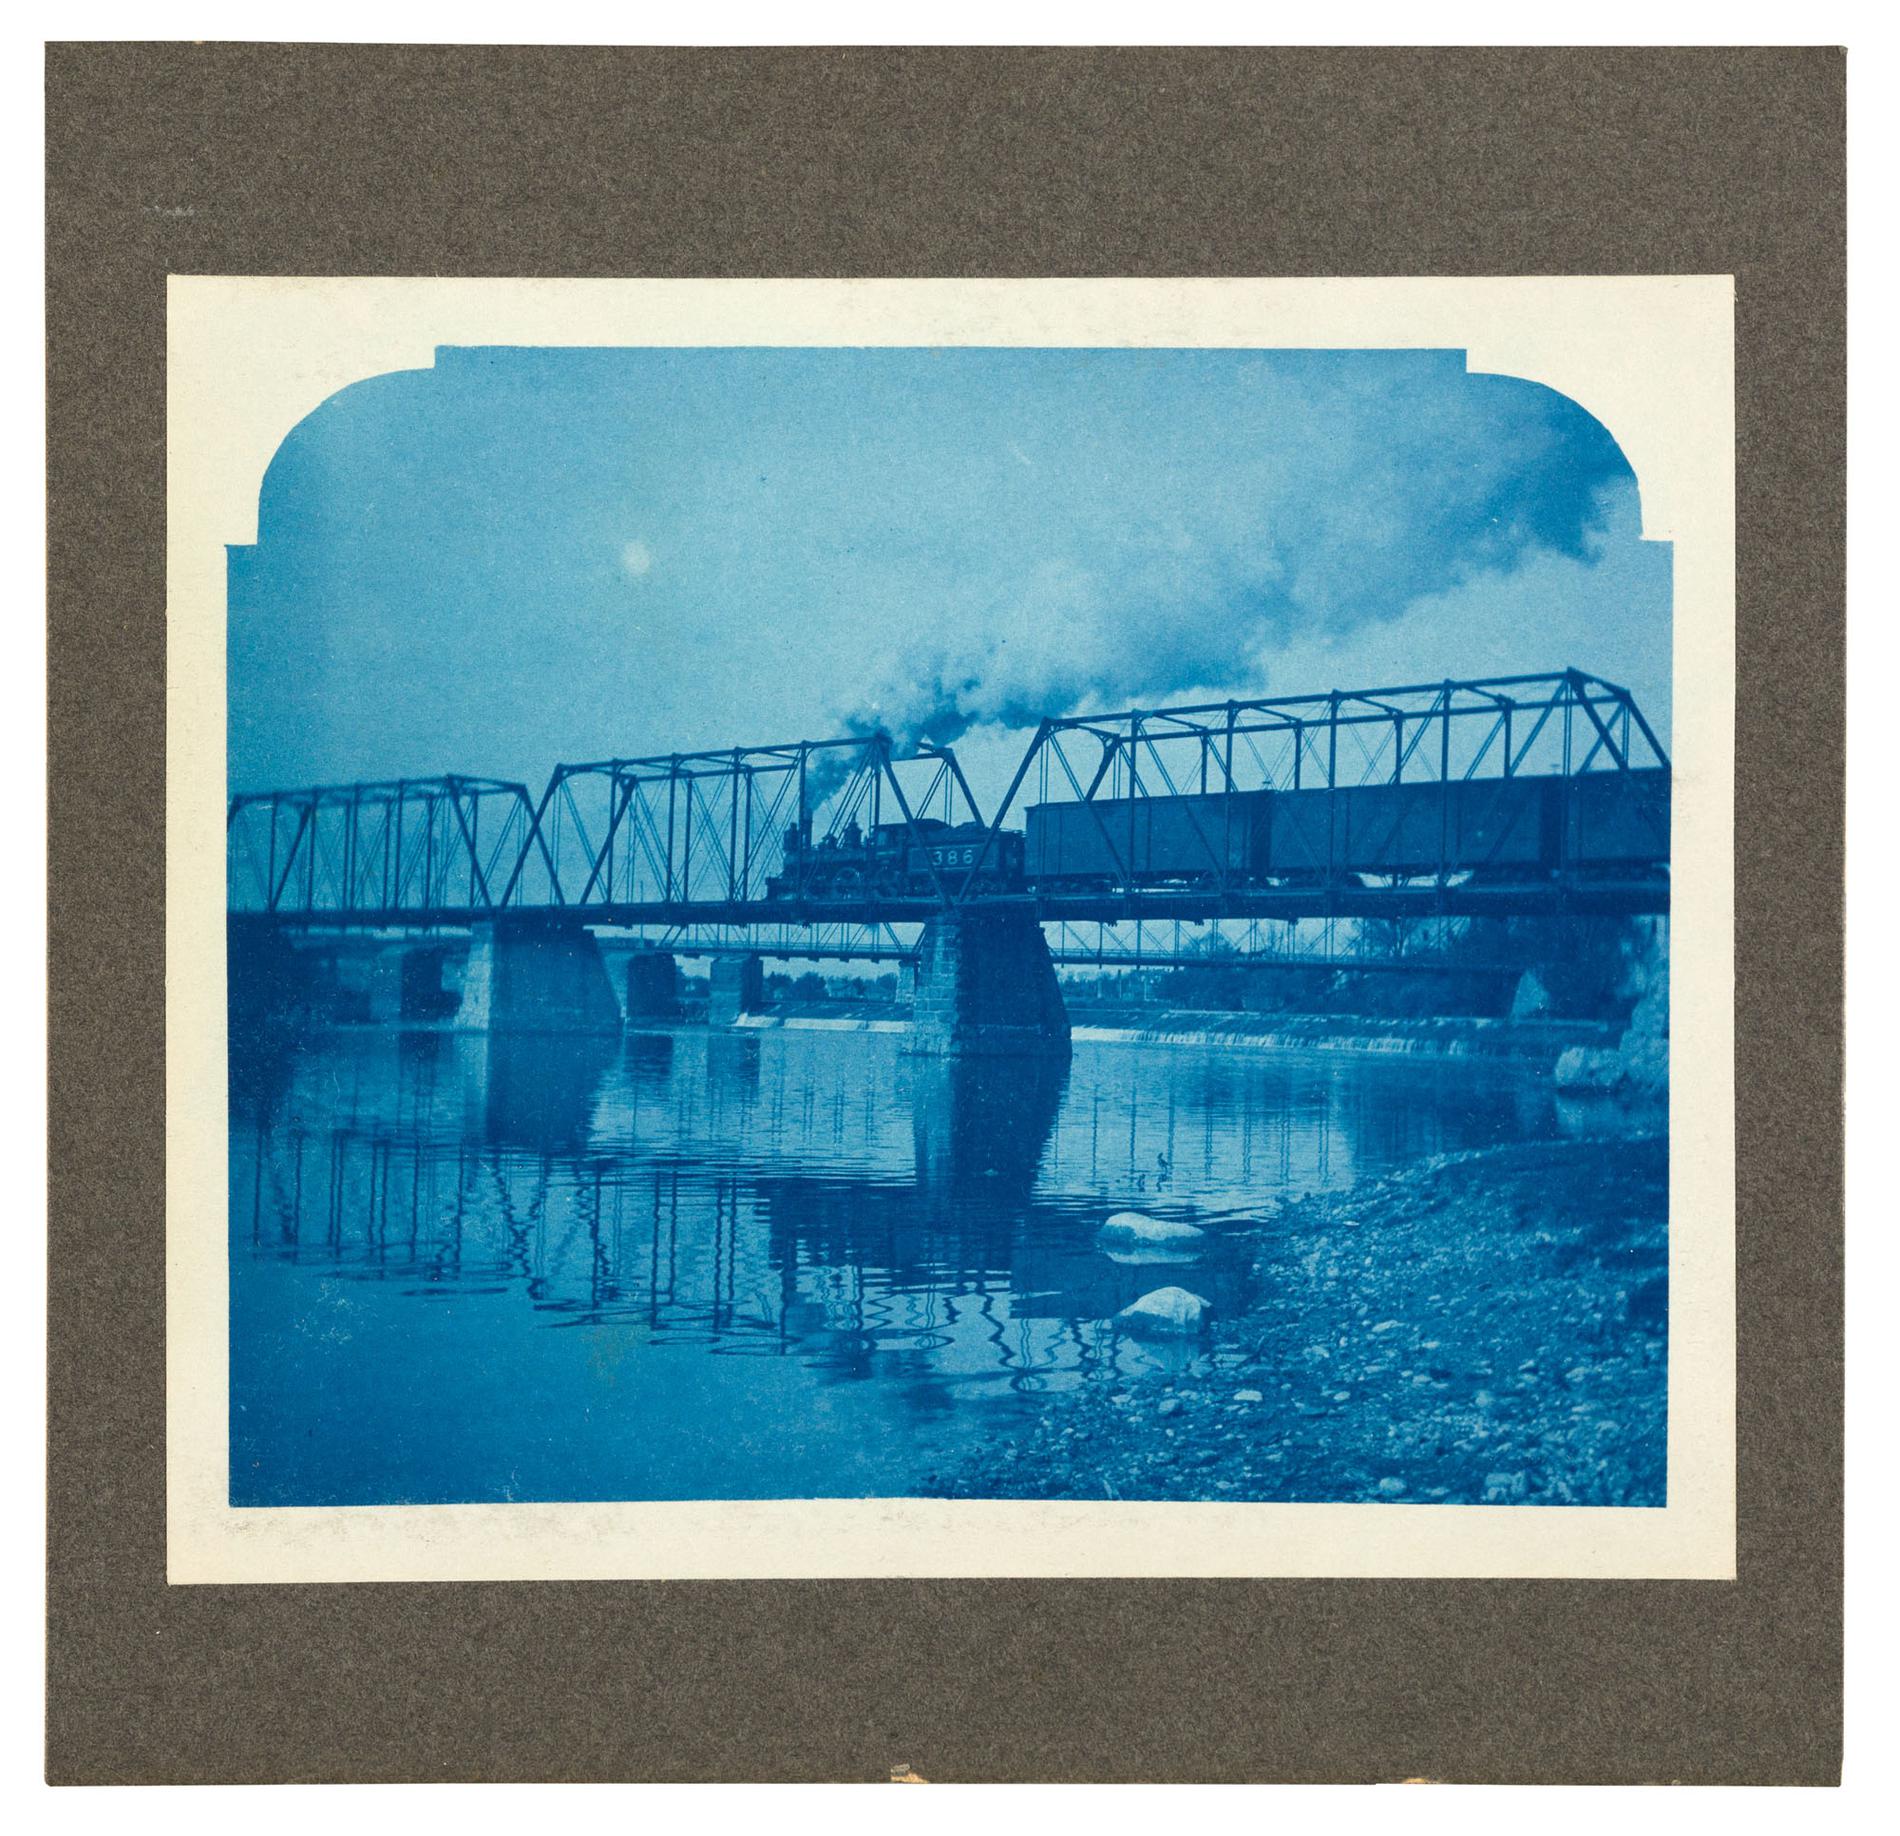 A blue-toned image of a train crossing a bridge over water